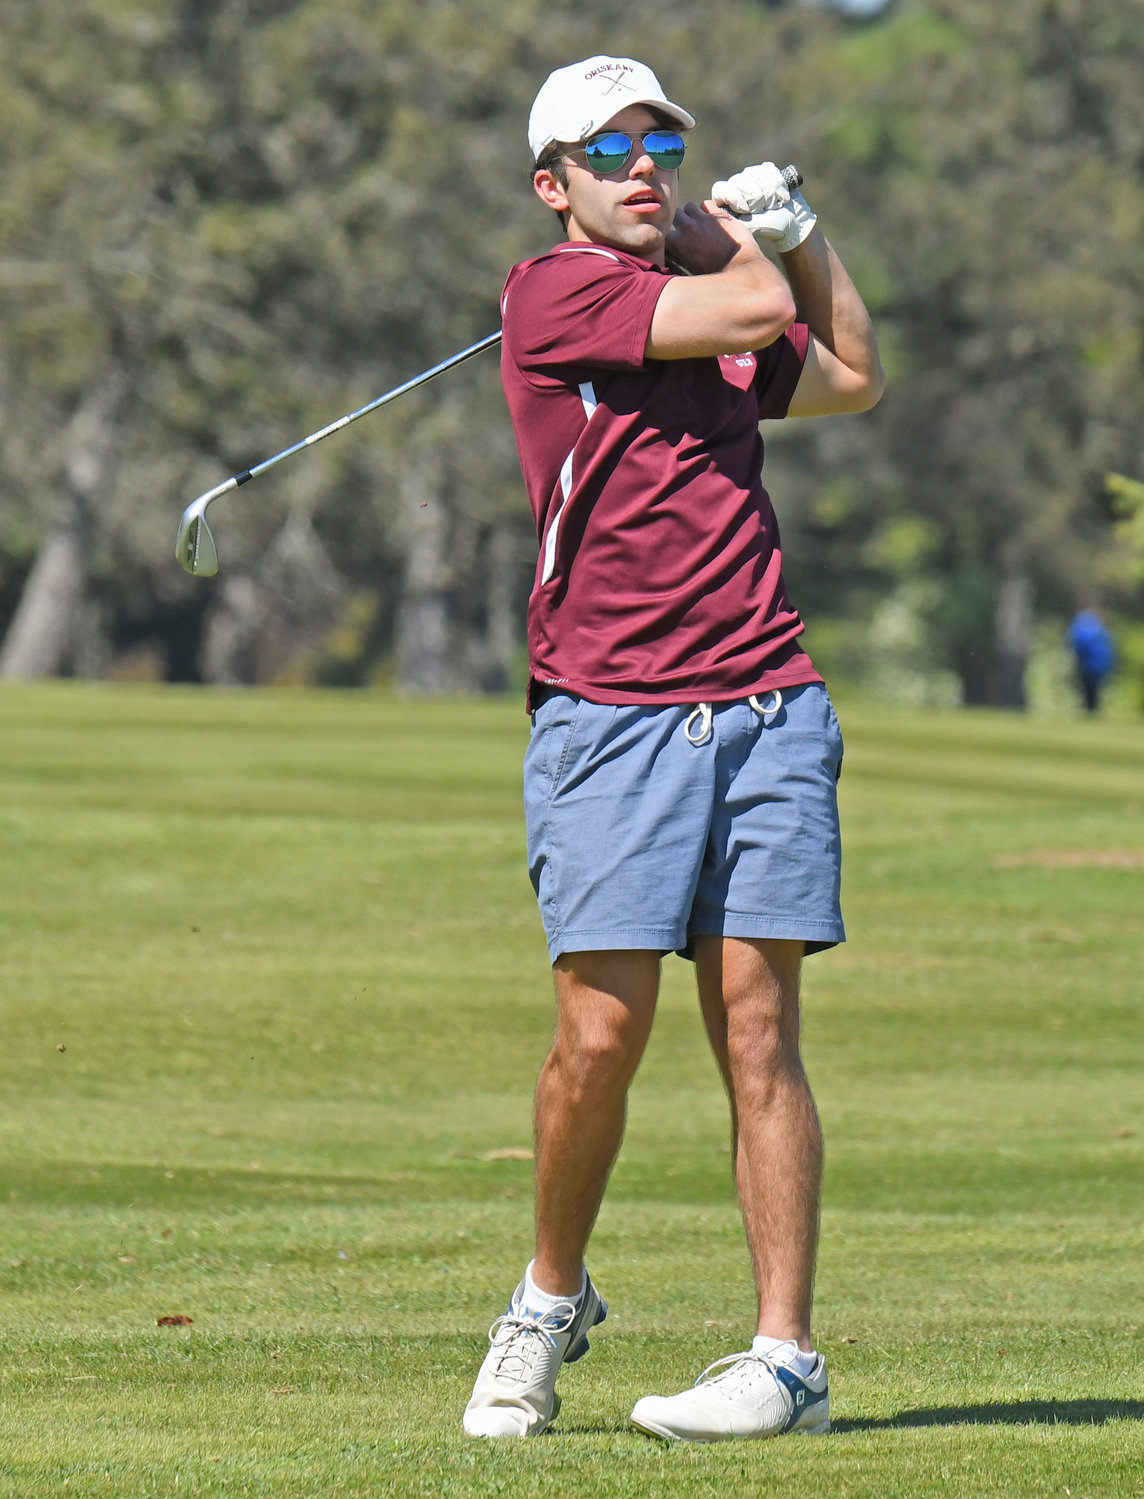 Oriskany senior Nick DeRiso watches his drive on the 10th hole at Crestwood Golf Course Wednesday against Holland Patent. DeRiso has had at least a share of the team's best score in seven of eight matches this season. Oriskany was 8-0 after the win against HP.